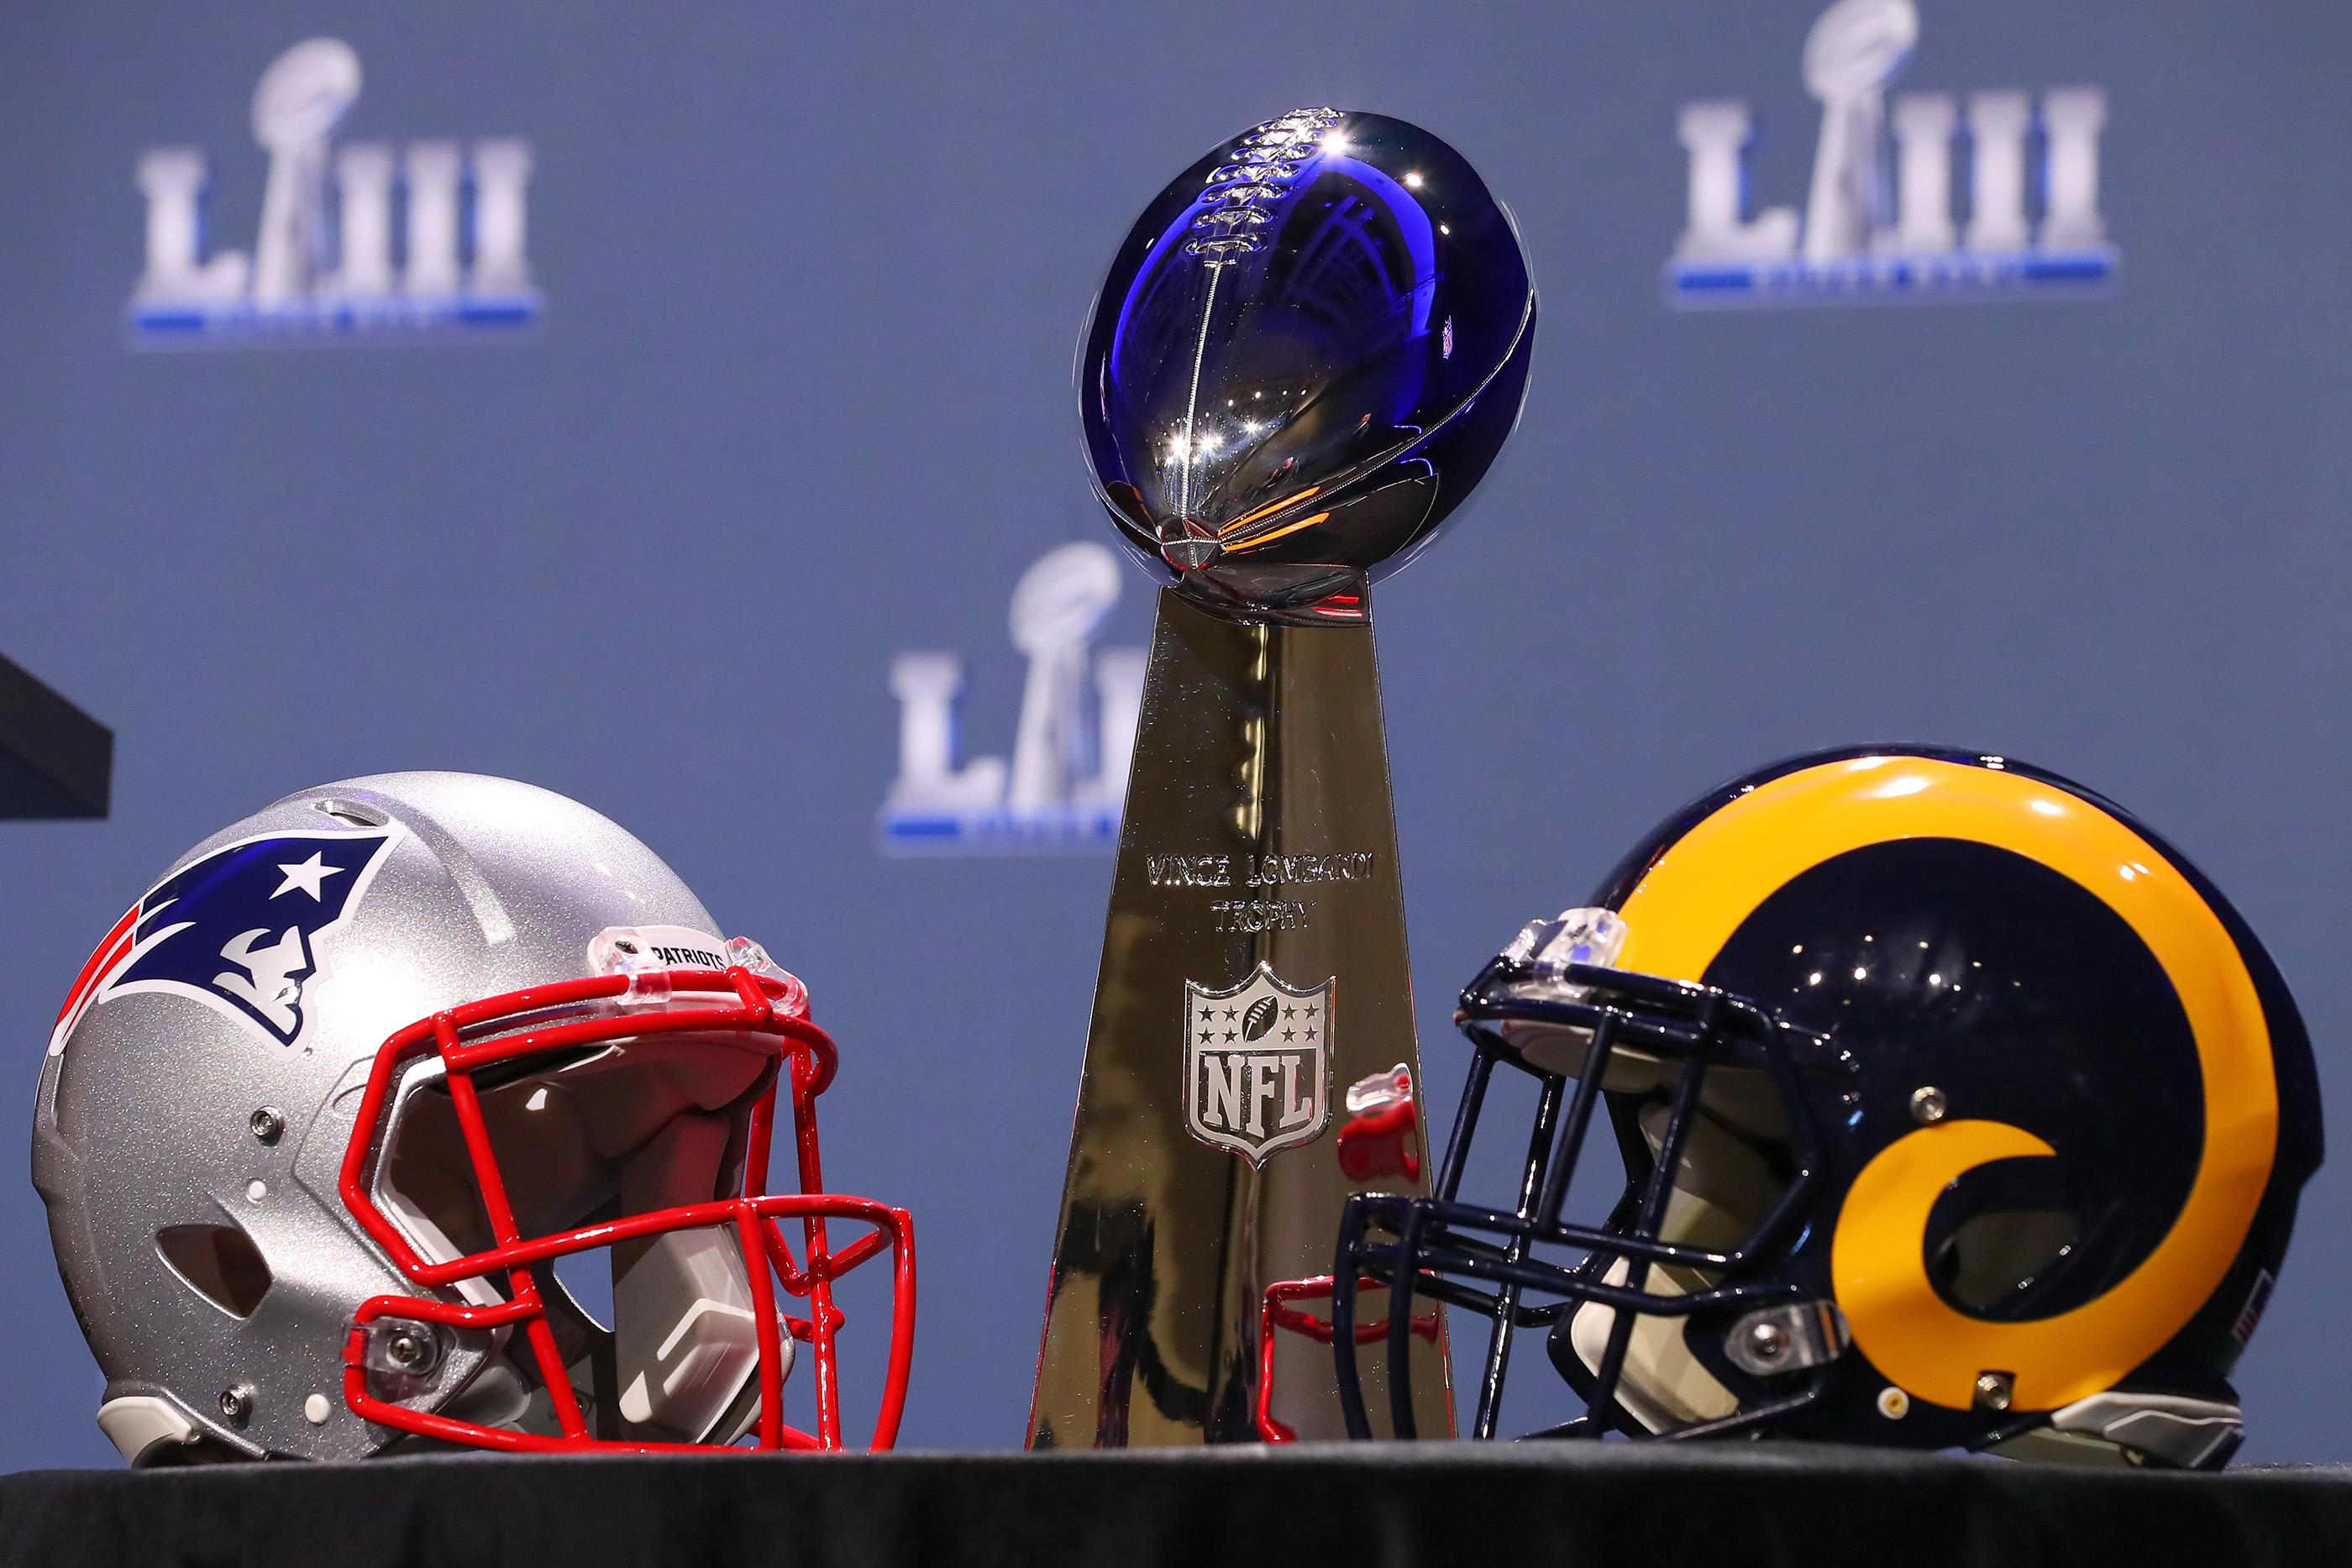 Super Bowl: What Are the Betting Odds for Patriots vs. Rams